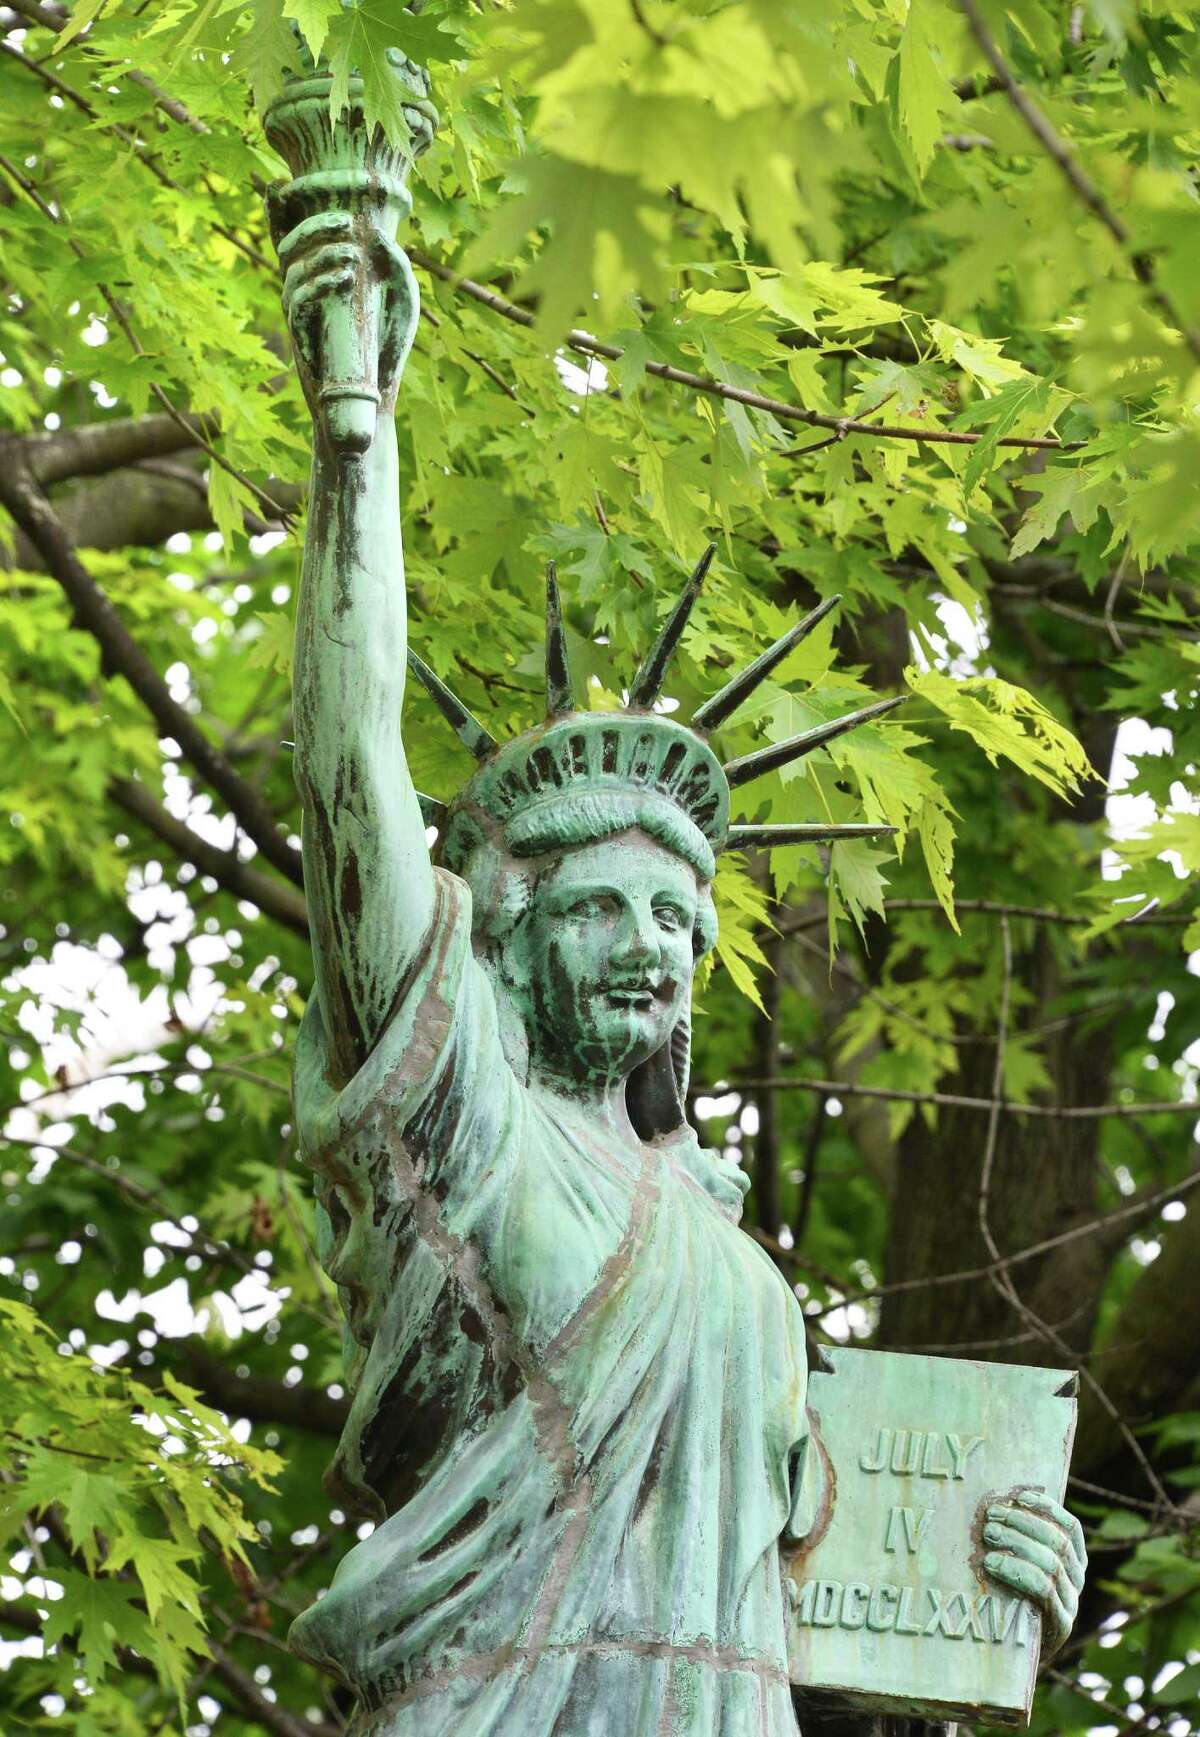 Statue of Liberty Replica in Liberty Park at the corner of Washington Avenue and State Street in Schenectady Wednesday June 6, 2012. (John Carl D'Annibale / Times Union)